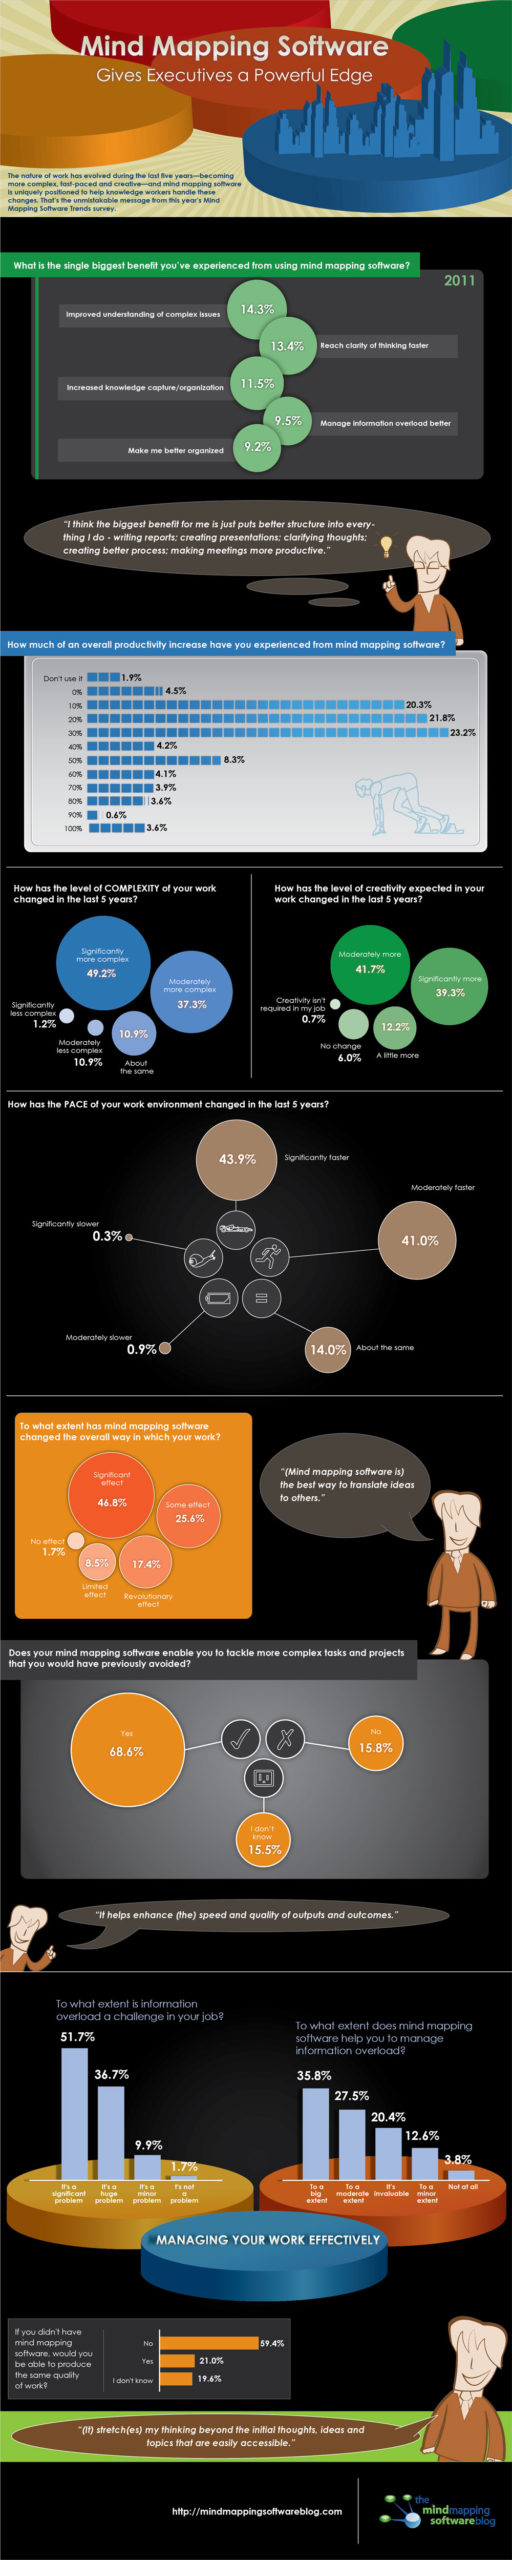 Mind Mapping Trends Survey Info Graphic